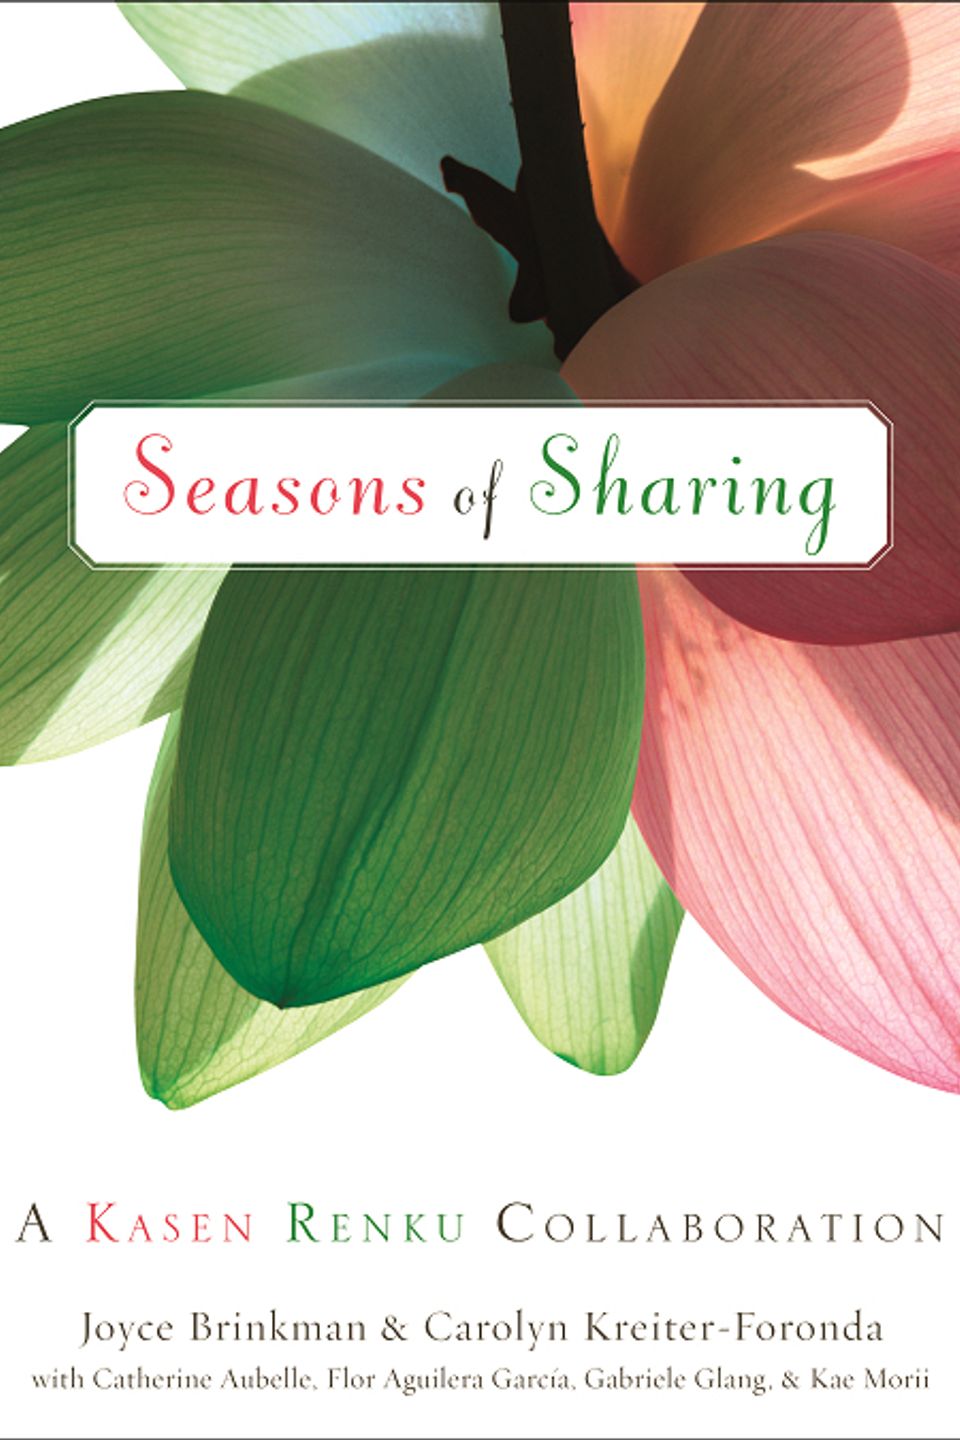 Seasons of sharing book cover20160713 1501 gmrc0w